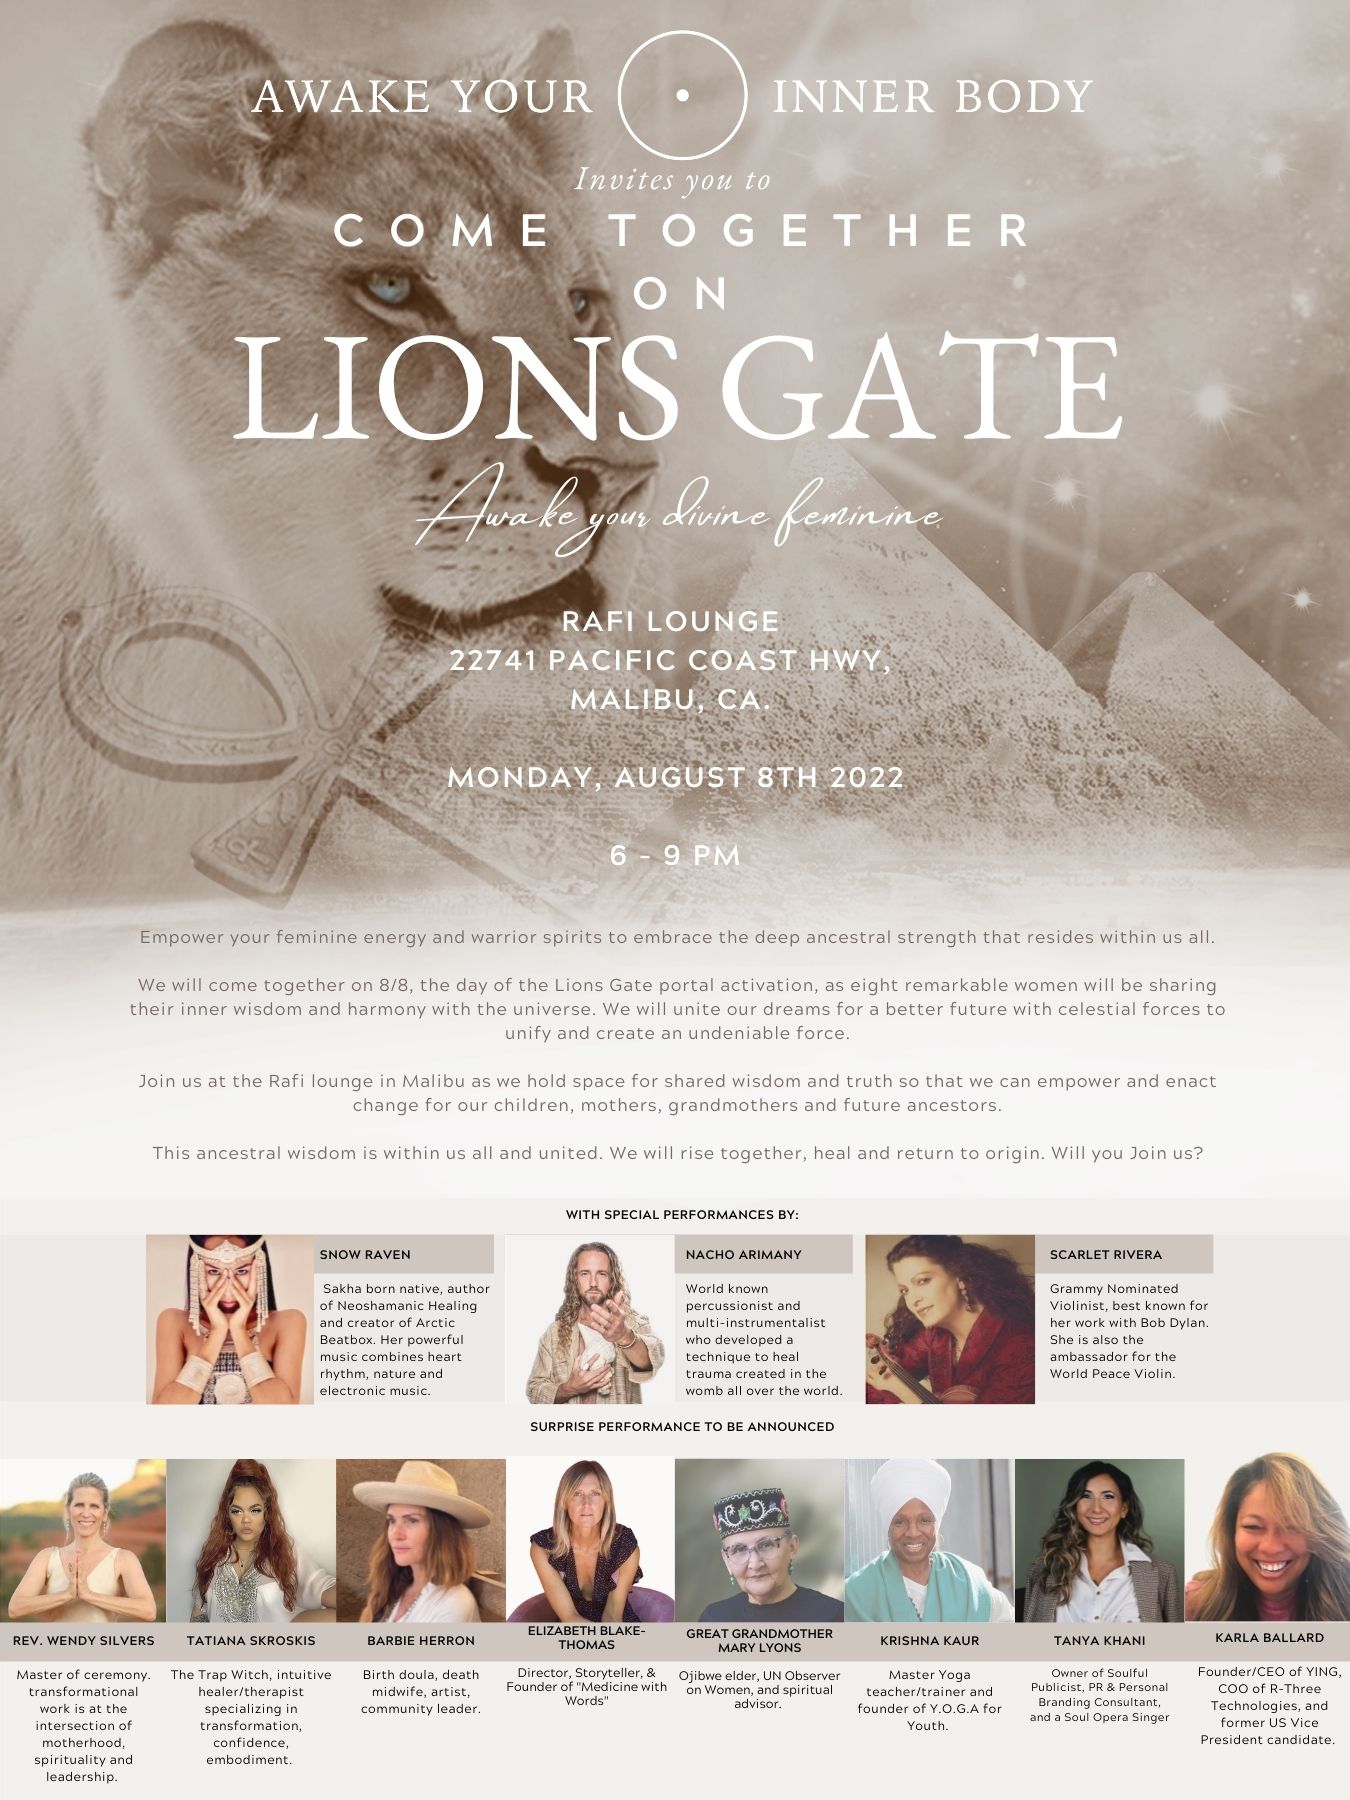 Iconic Designer Sue Wong To Be Honored At The Come Together on Lion’s Gate Female Empowerment Panel Hosted By Awake Your Inner Body August 8th, 2022 